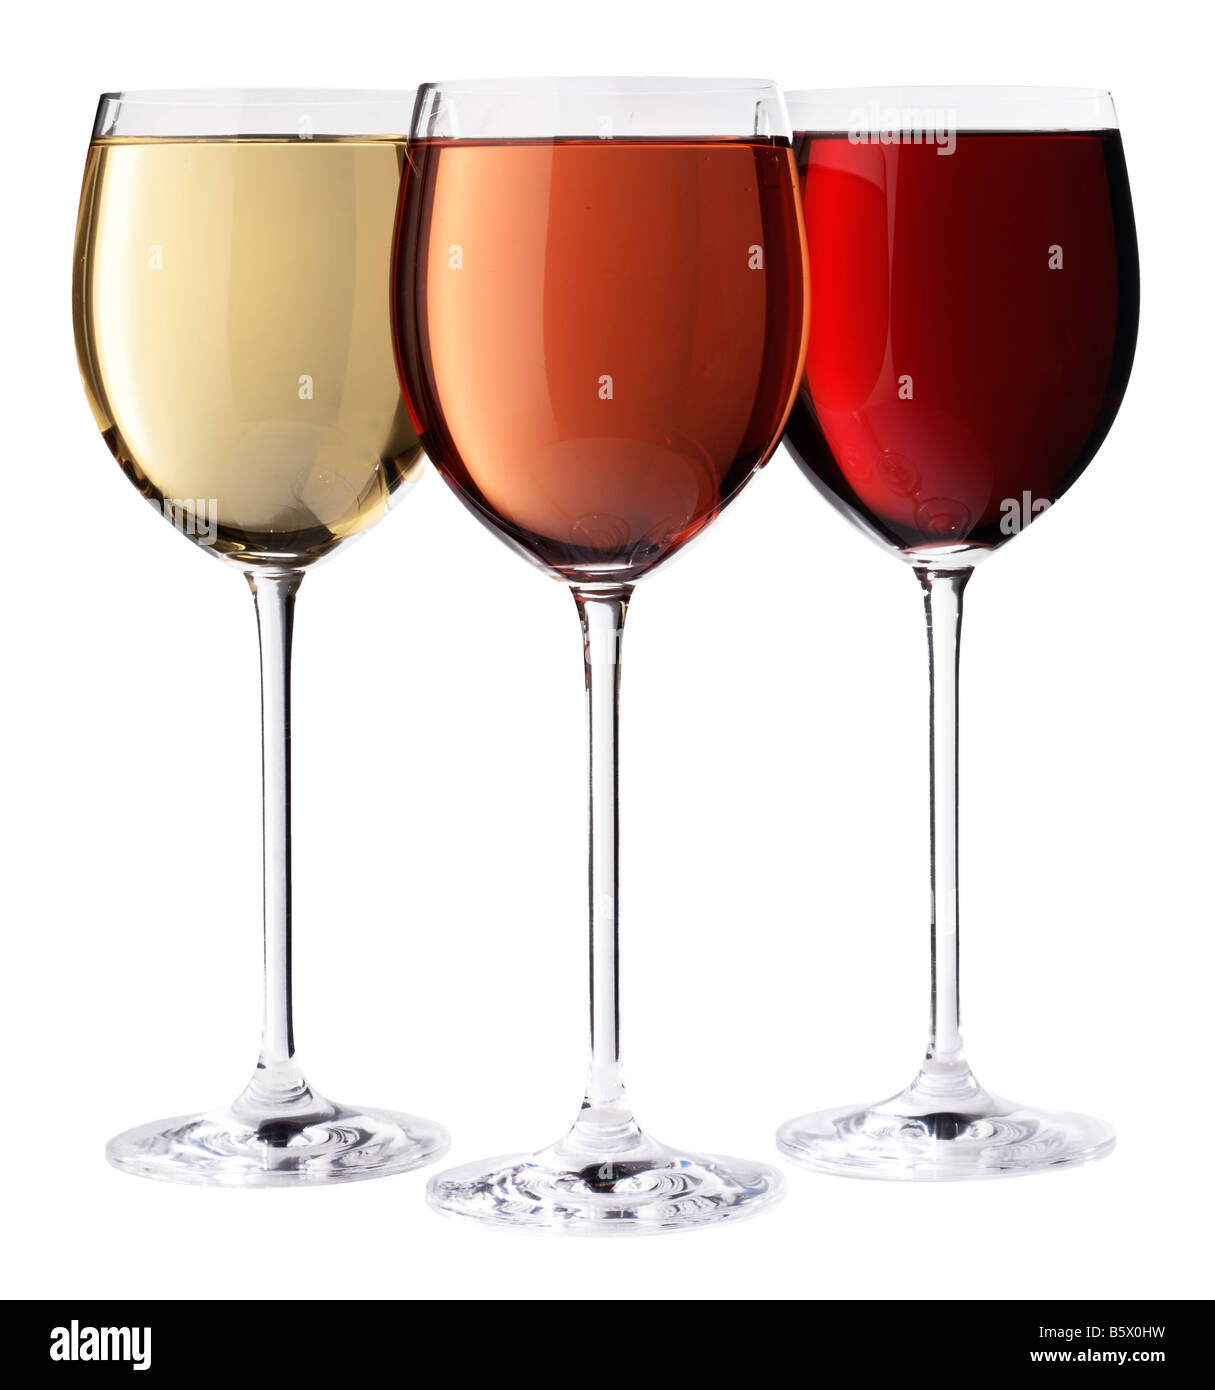 THREE GLASSES OF RED,WHITE AND ROSE WINE Stock Photo